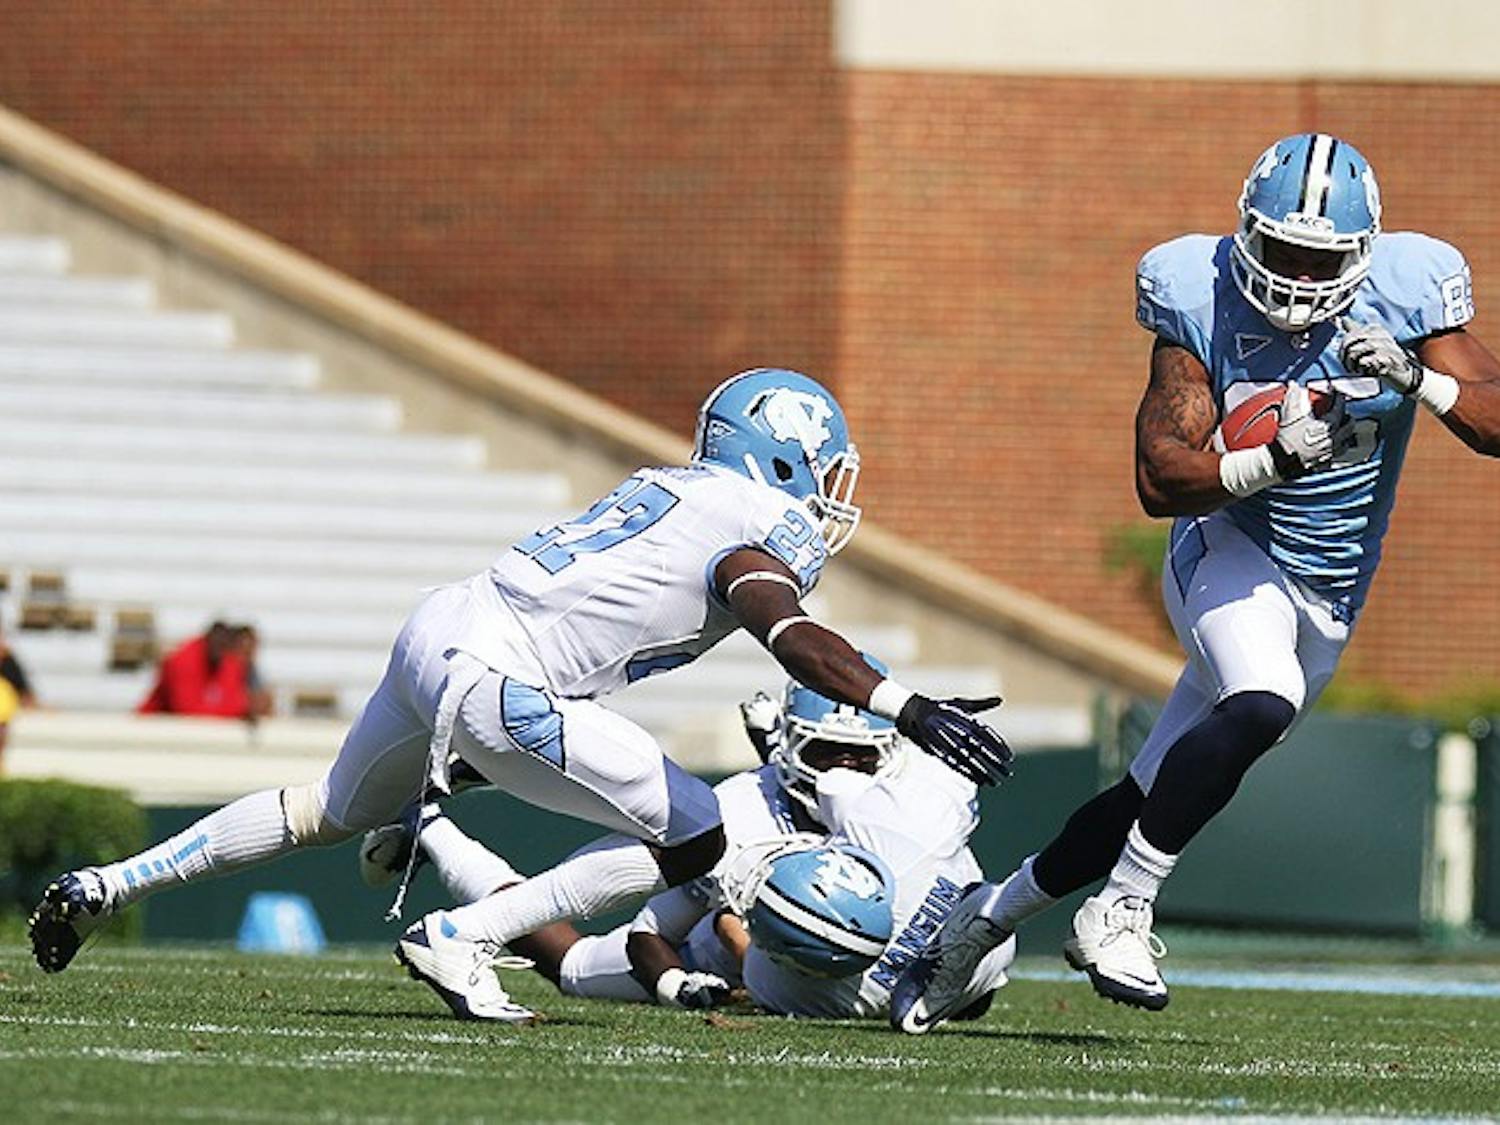 UNC hosted its annual spring football game on Saturday, April 14 at Kenan Stadium. 